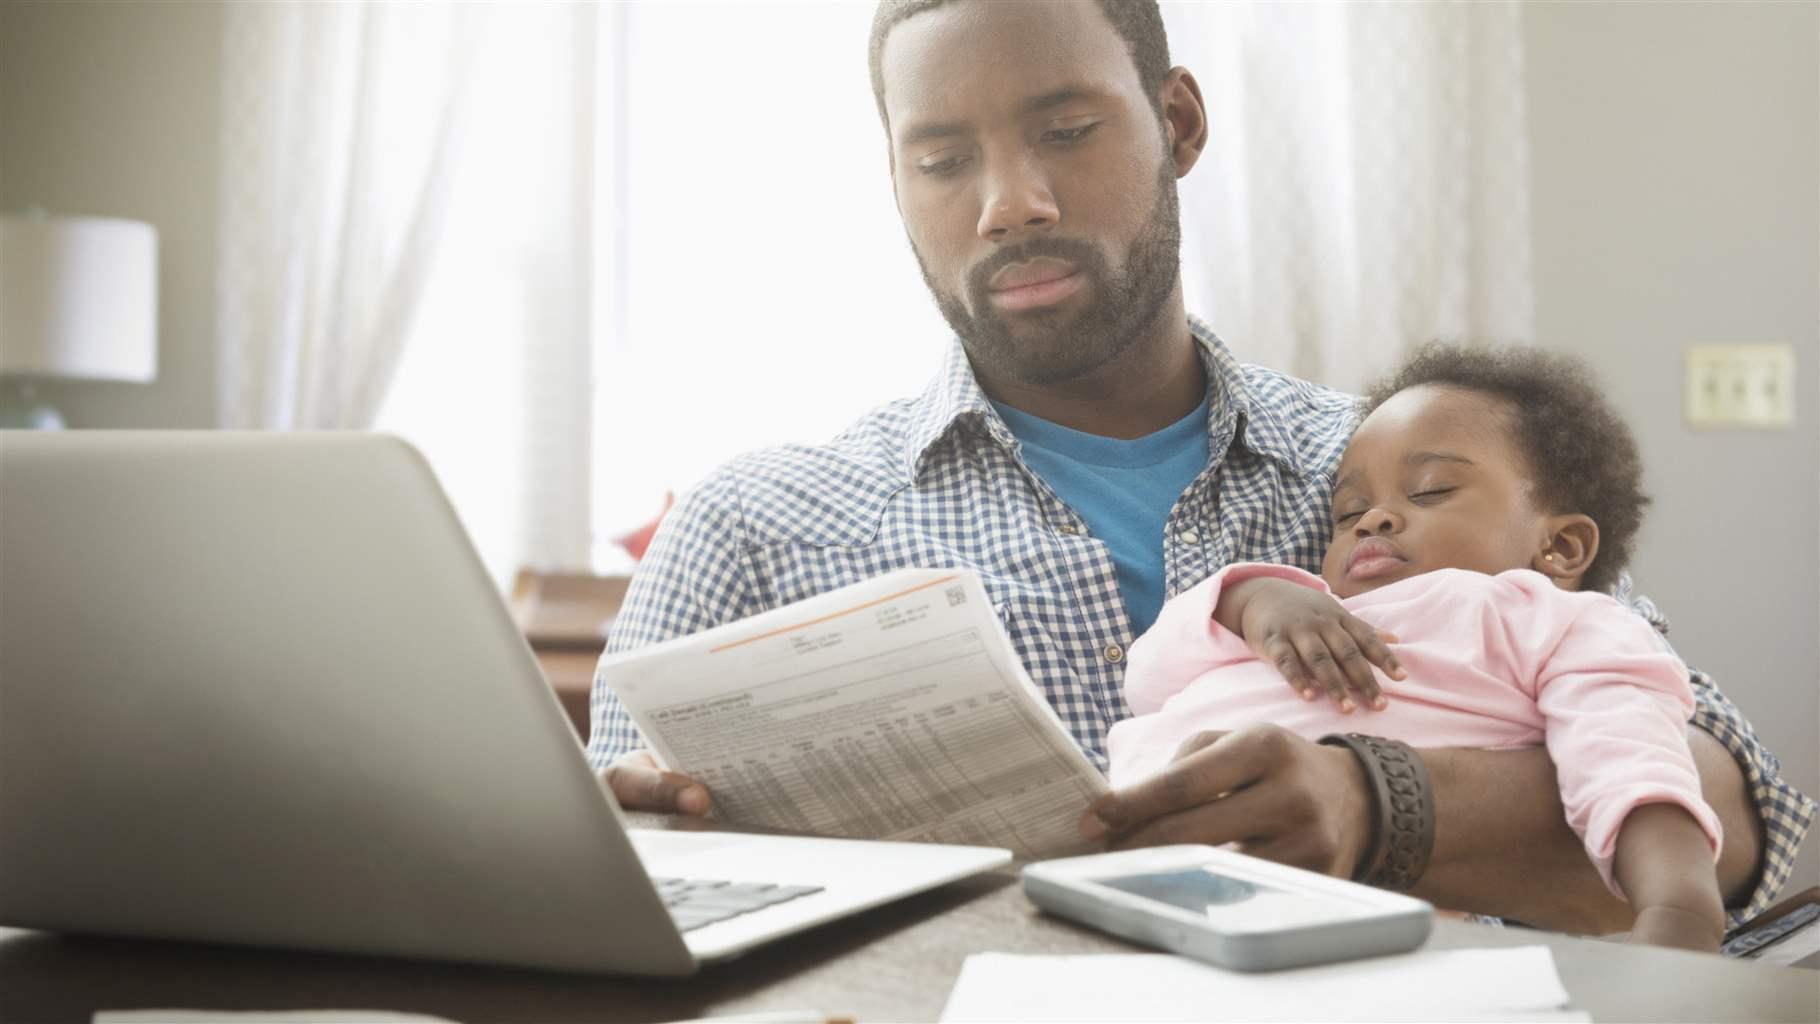 Father holding baby daughter and working from home